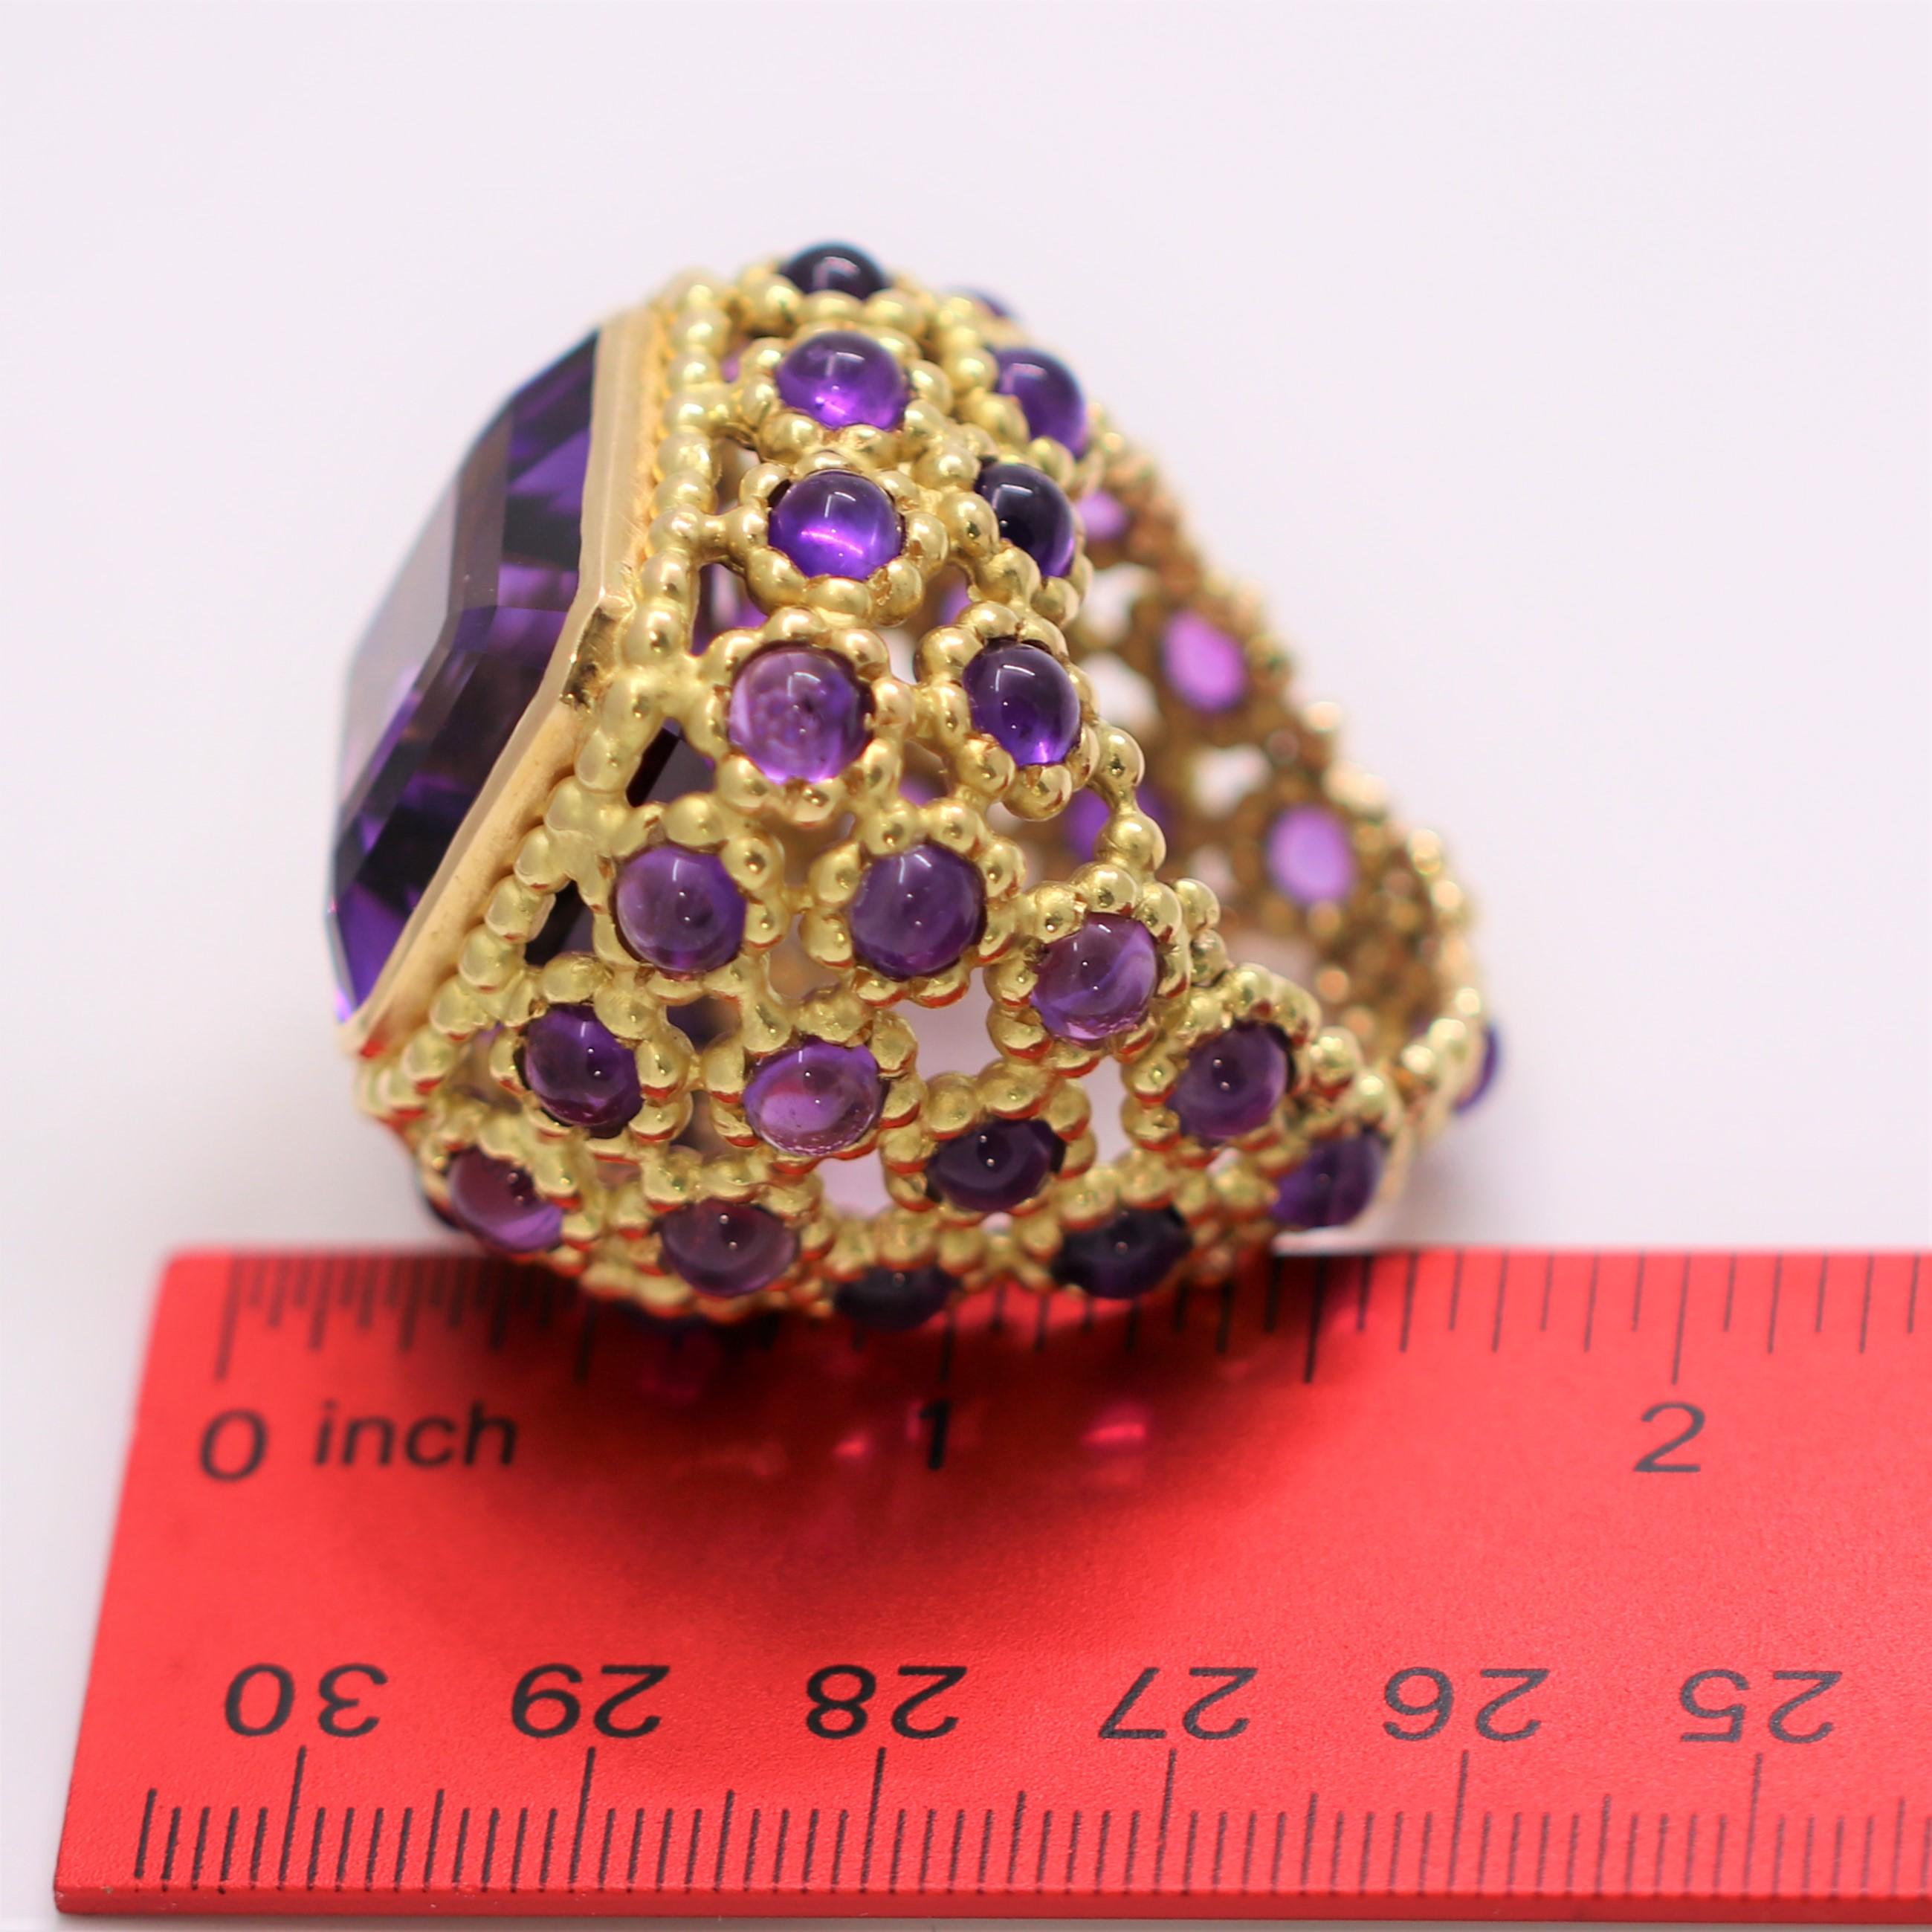 Elegant Grand Scale French Mid-20th Century 18k Gold and Amethyst Fashion Ring For Sale 6